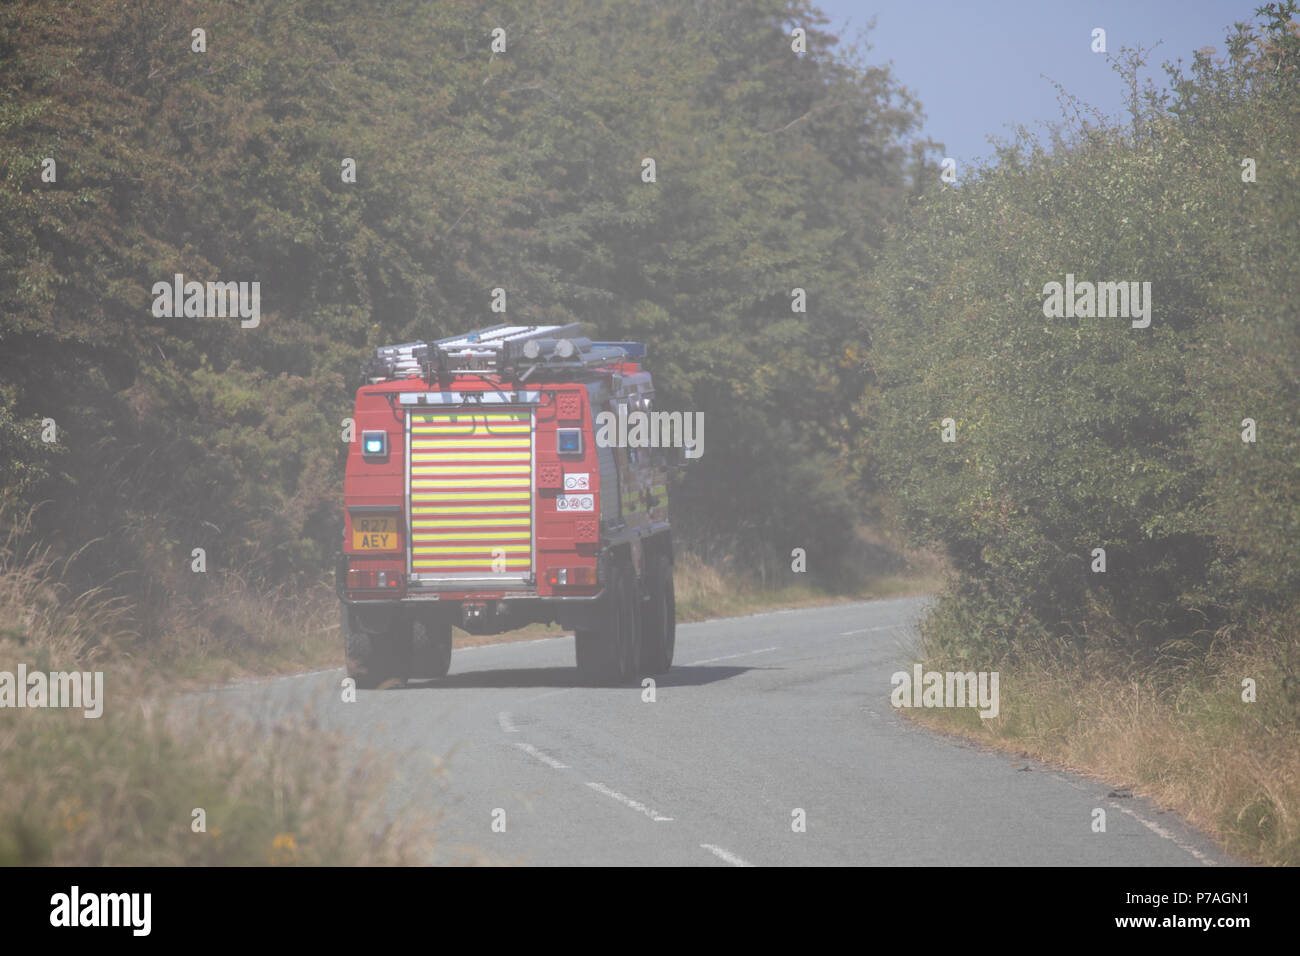 North Wales, 5th July 2018, UK Weather:  Fire fighters tackle heathland fire with all terrain vehicles on Halkyn Mountain near to the village of Brynford days after local council issue sever fire risk for area. Roads into the area are currently closed.  © DGDImages/Alamy Live News Stock Photo